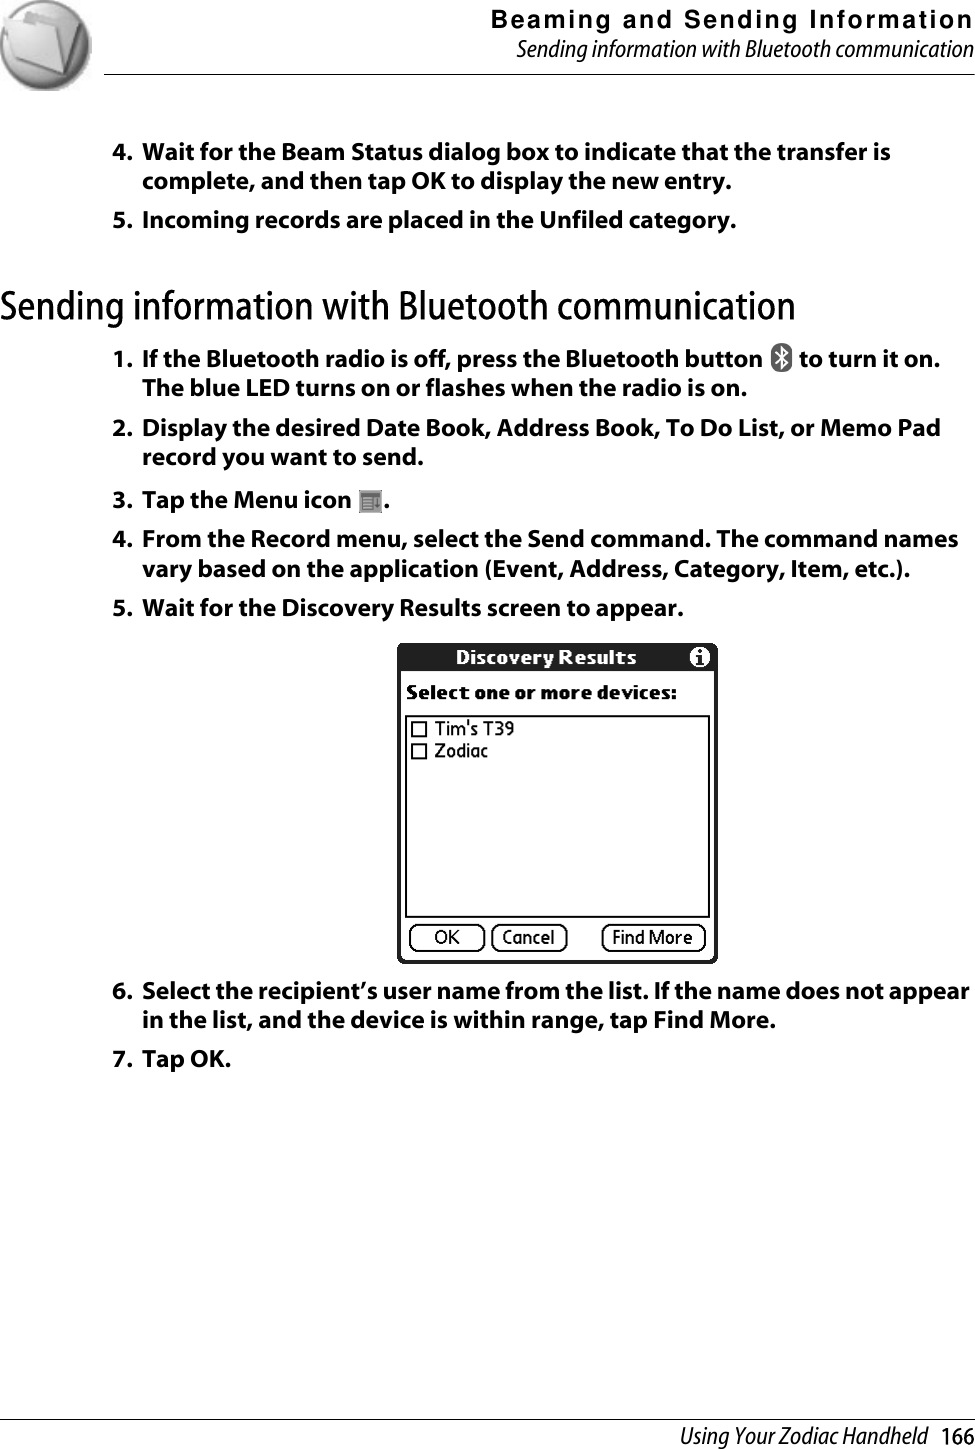 Beaming and Sending InformationSending information with Bluetooth communicationUsing Your Zodiac Handheld   1664. Wait for the Beam Status dialog box to indicate that the transfer is complete, and then tap OK to display the new entry. 5. Incoming records are placed in the Unfiled category.Sending information with Bluetooth communication1. If the Bluetooth radio is off, press the Bluetooth button   to turn it on. The blue LED turns on or flashes when the radio is on.2. Display the desired Date Book, Address Book, To Do List, or Memo Pad record you want to send.3. Tap the Menu icon  . 4. From the Record menu, select the Send command. The command names vary based on the application (Event, Address, Category, Item, etc.).5. Wait for the Discovery Results screen to appear.6. Select the recipient’s user name from the list. If the name does not appear in the list, and the device is within range, tap Find More.7. Tap OK.